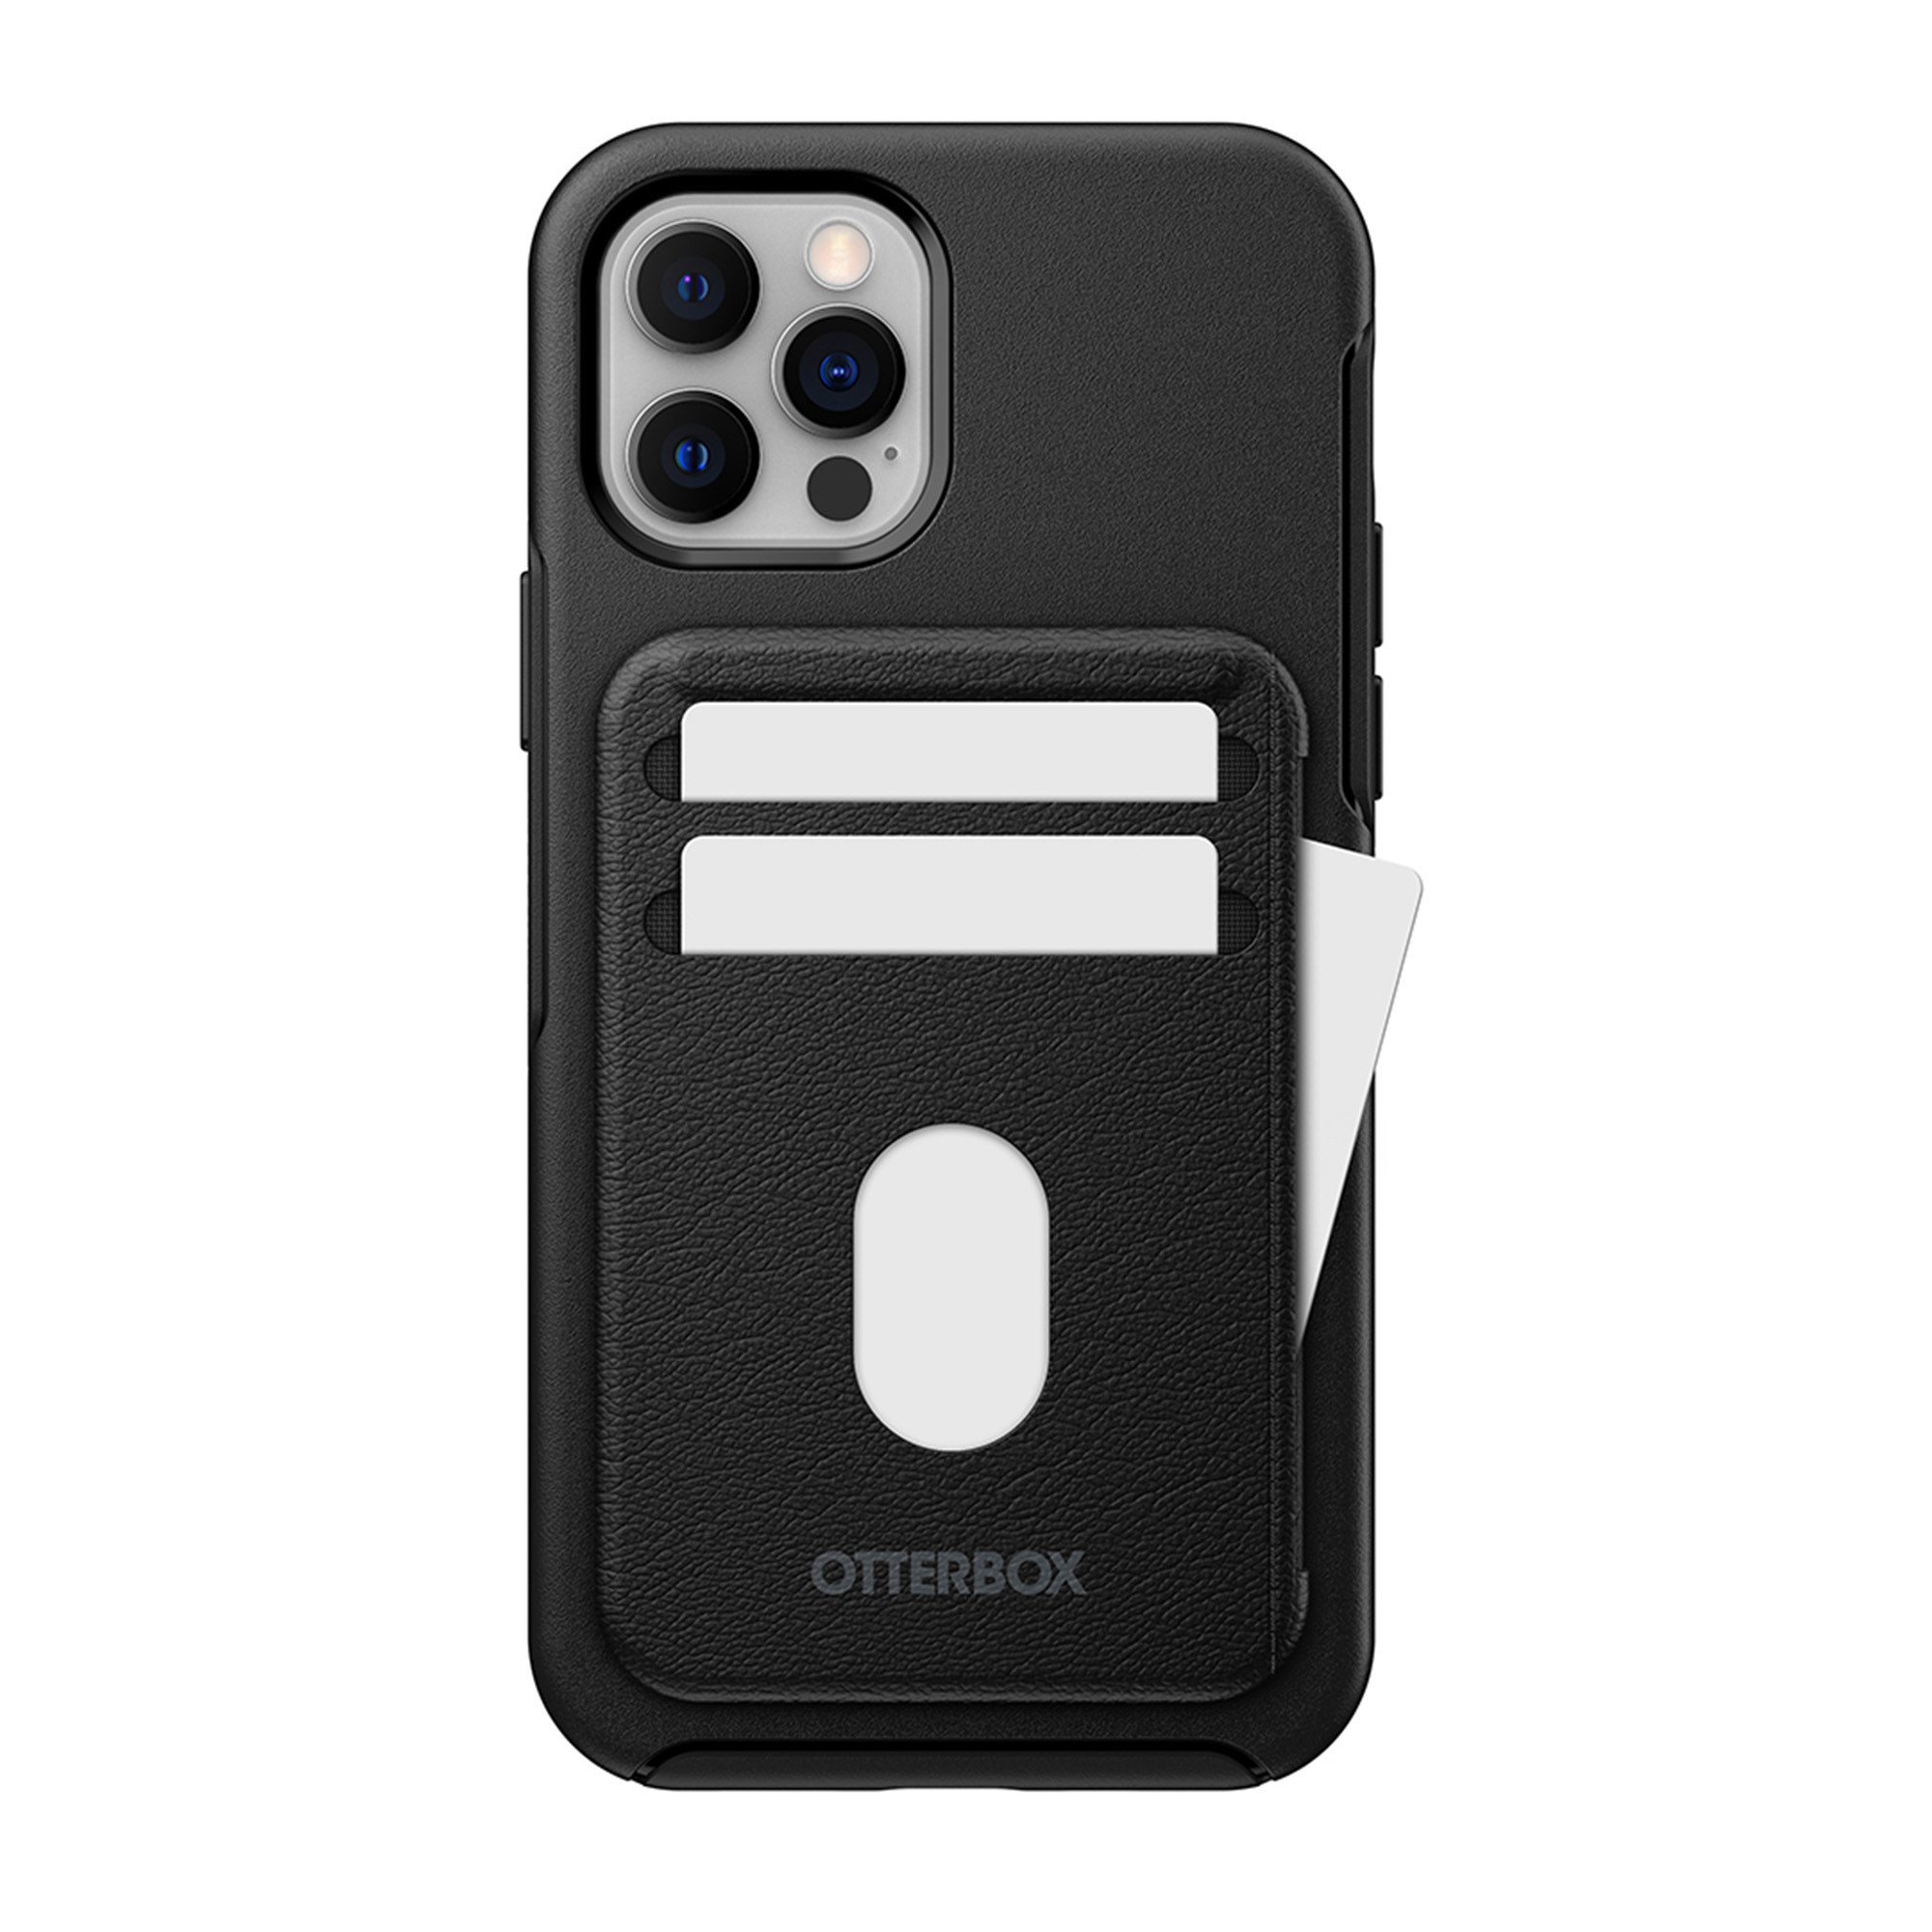 Otterbox Black MagSafe Wallet Attachment